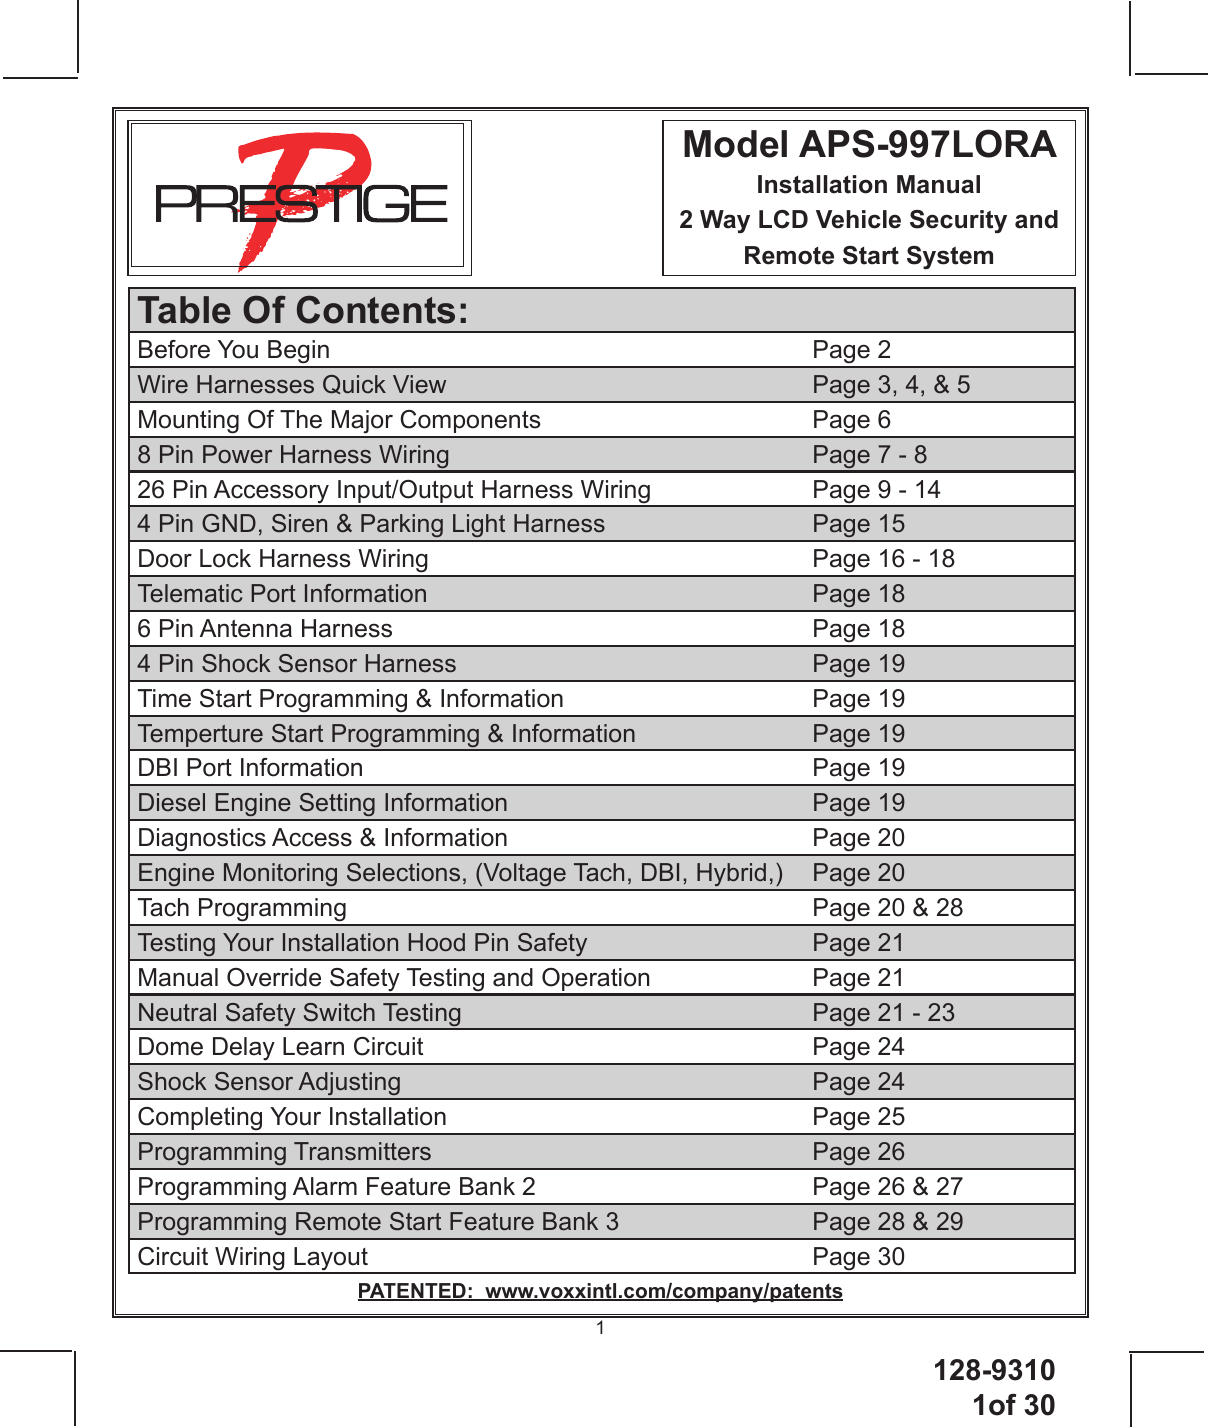 128-93101of 301Model APS-997LORAInstallation Manual2 Way LCD Vehicle Security and Remote Start System PATENTED:  www.voxxintl.com/company/patentsTable Of Contents:Before You Begin       Page 2Wire Harnesses Quick View          Page 3, 4, &amp; 5Mounting Of The Major Components        Page 68 Pin Power Harness Wiring          Page 7 - 826 Pin Accessory Input/Output Harness Wiring      Page 9 - 144 Pin GND, Siren &amp; Parking Light Harness      Page 15Door Lock Harness Wiring            Page 16 - 18Telematic Port Information      Page 186 Pin Antenna Harness      Page 184 Pin Shock Sensor Harness          Page 19Time Start Programming &amp; Information        Page 19Temperture Start Programming &amp; Information      Page 19DBI Port Information       Page 19Diesel Engine Setting Information         Page 19Diagnostics Access &amp; Information     Page 20Engine Monitoring Selections, (Voltage Tach, DBI, Hybrid,)  Page 20Tach Programming       Page 20 &amp; 28Testing Your Installation Hood Pin Safety      Page 21Manual Override Safety Testing and Operation      Page 21Neutral Safety Switch Testing          Page 21 - 23Dome Delay Learn Circuit      Page 24Shock Sensor Adjusting      Page 24Completing Your Installation     Page 25Programming Transmitters      Page 26Programming Alarm Feature Bank 2        Page 26 &amp; 27Programming Remote Start Feature Bank 3      Page 28 &amp; 29Circuit Wiring Layout      Page 30